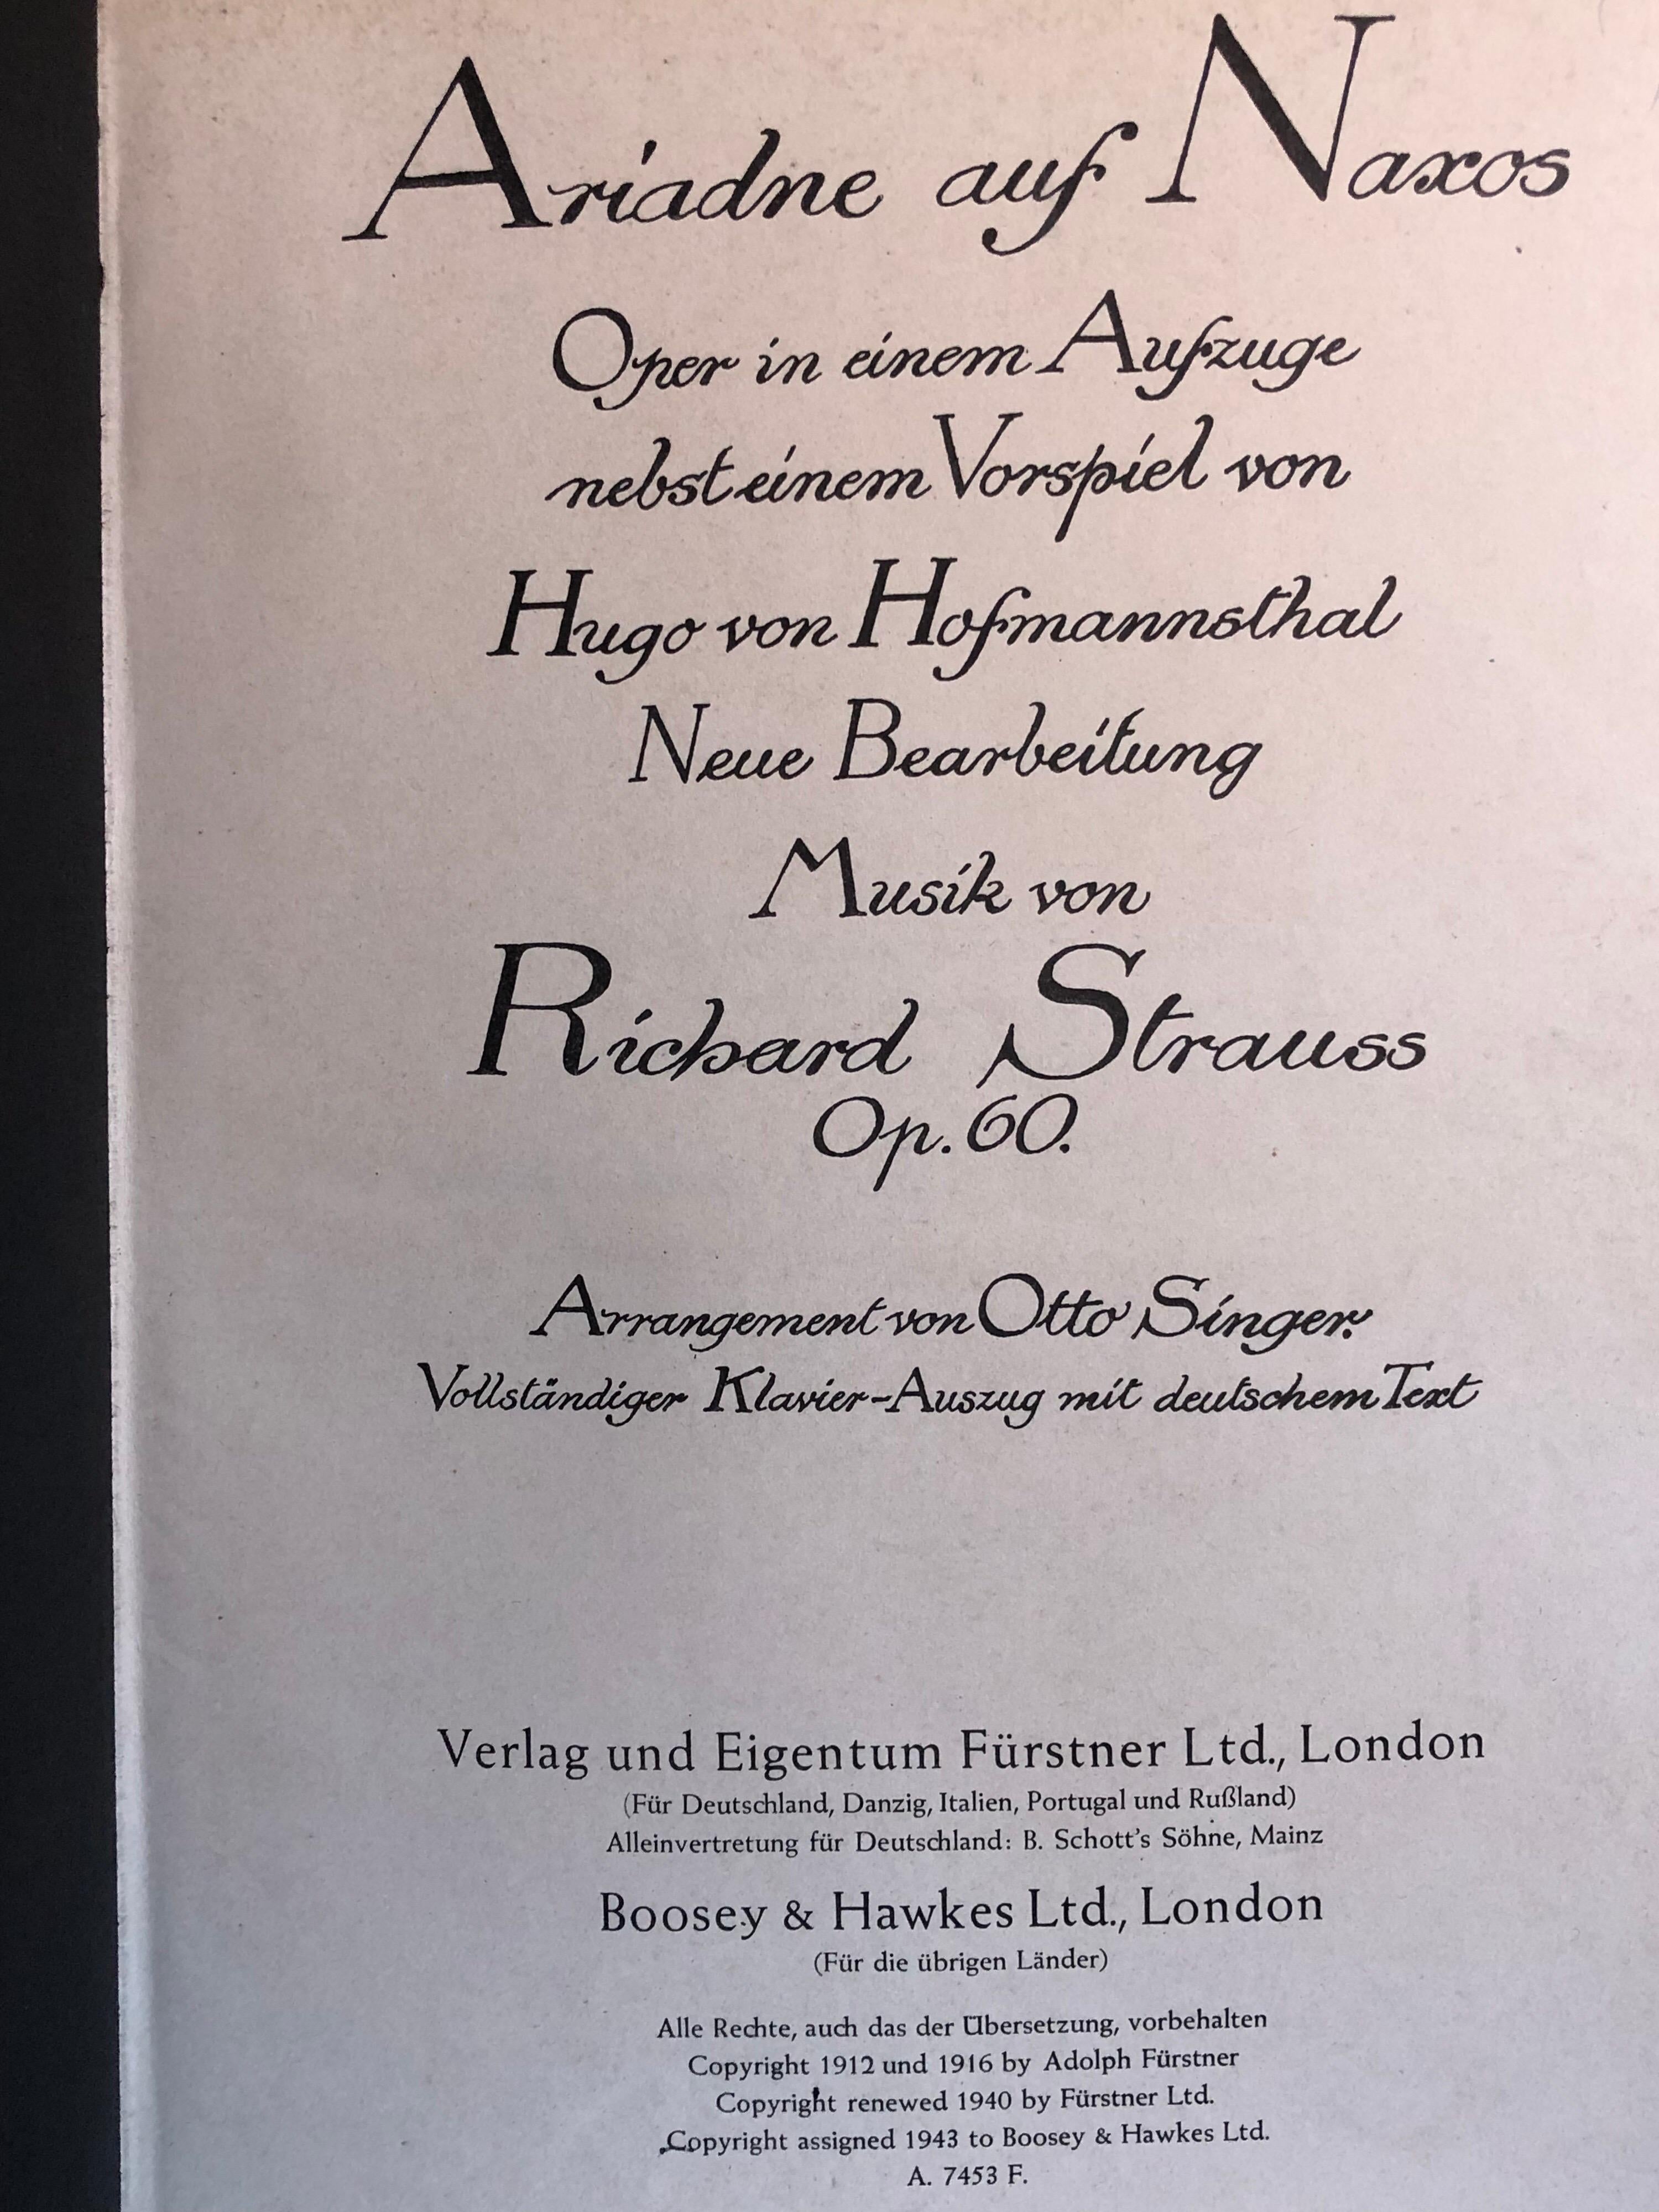 Ariadne on Naxos. Opera in a procession by Hugo von Hofmannsthal. Music by TRichard Strauss. Op. 60.
To play after the burger as a nobleman of the Molière. Arrangement of Otto Singer
Strauss, Richard (1864-1949) Ariadne auf Naxos, Signed.
Pages: